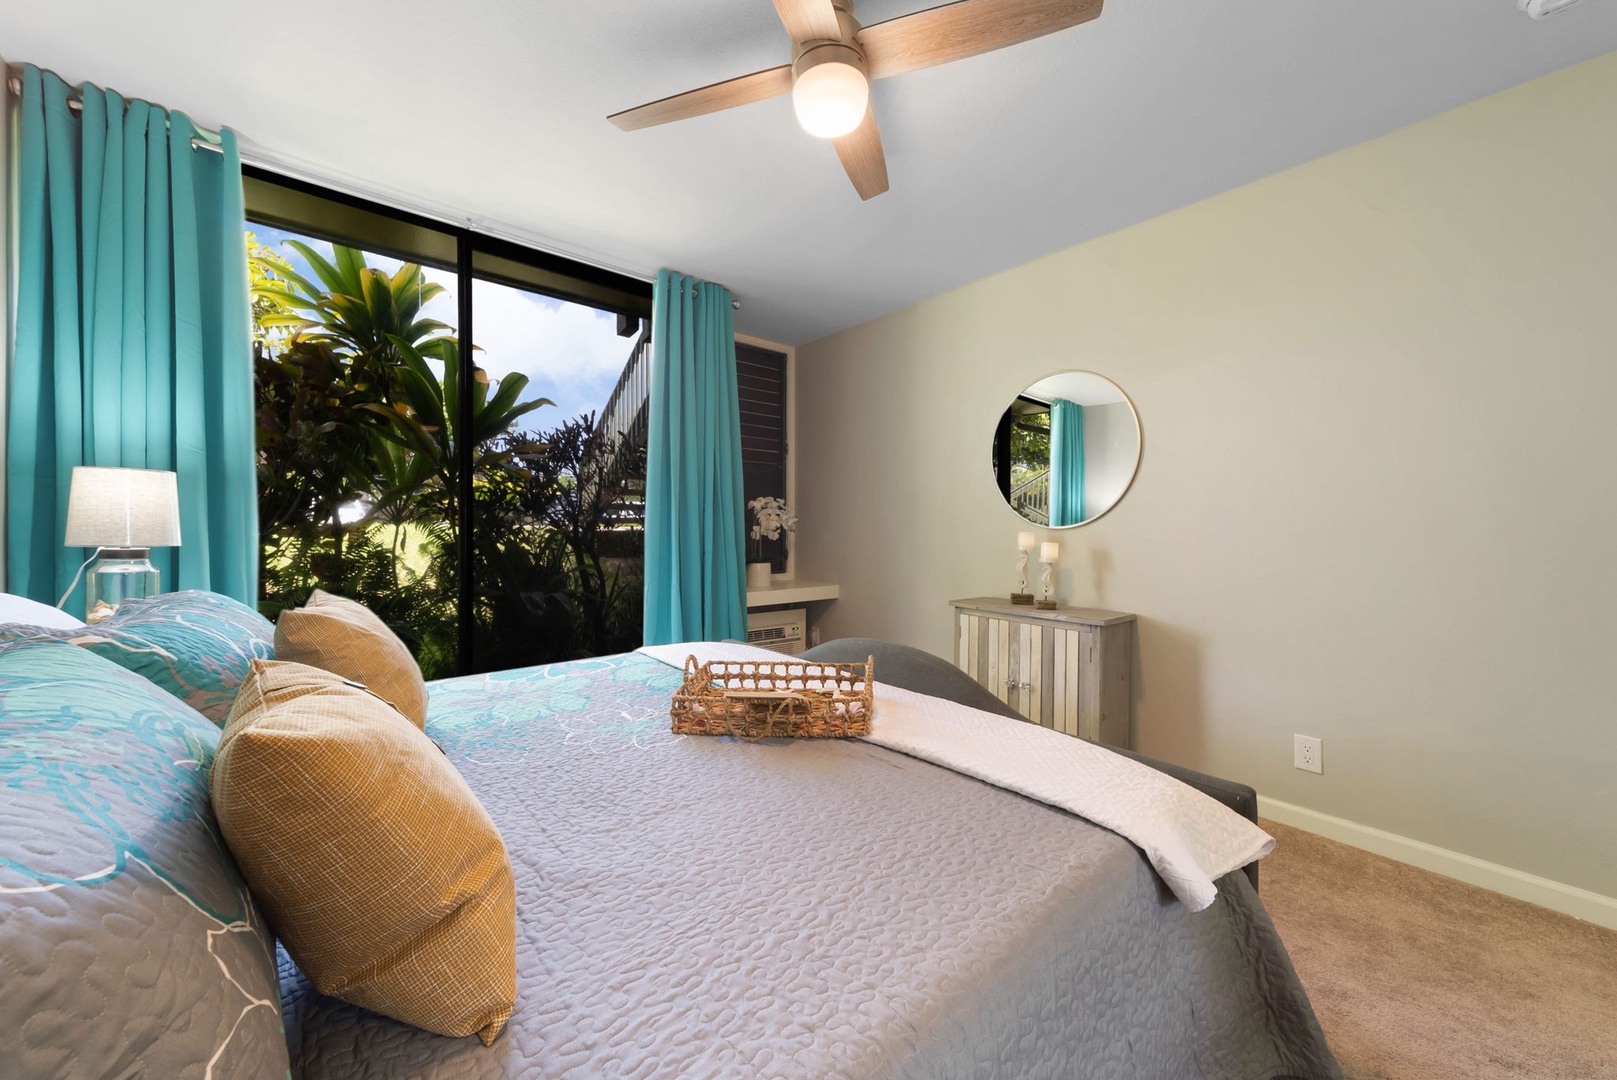 Kahuku Vacation Rentals, Turtle Bay's Kuilima Estates West #104 - Take in the beauty of the lush, tropical greenery from the comfort of your bed